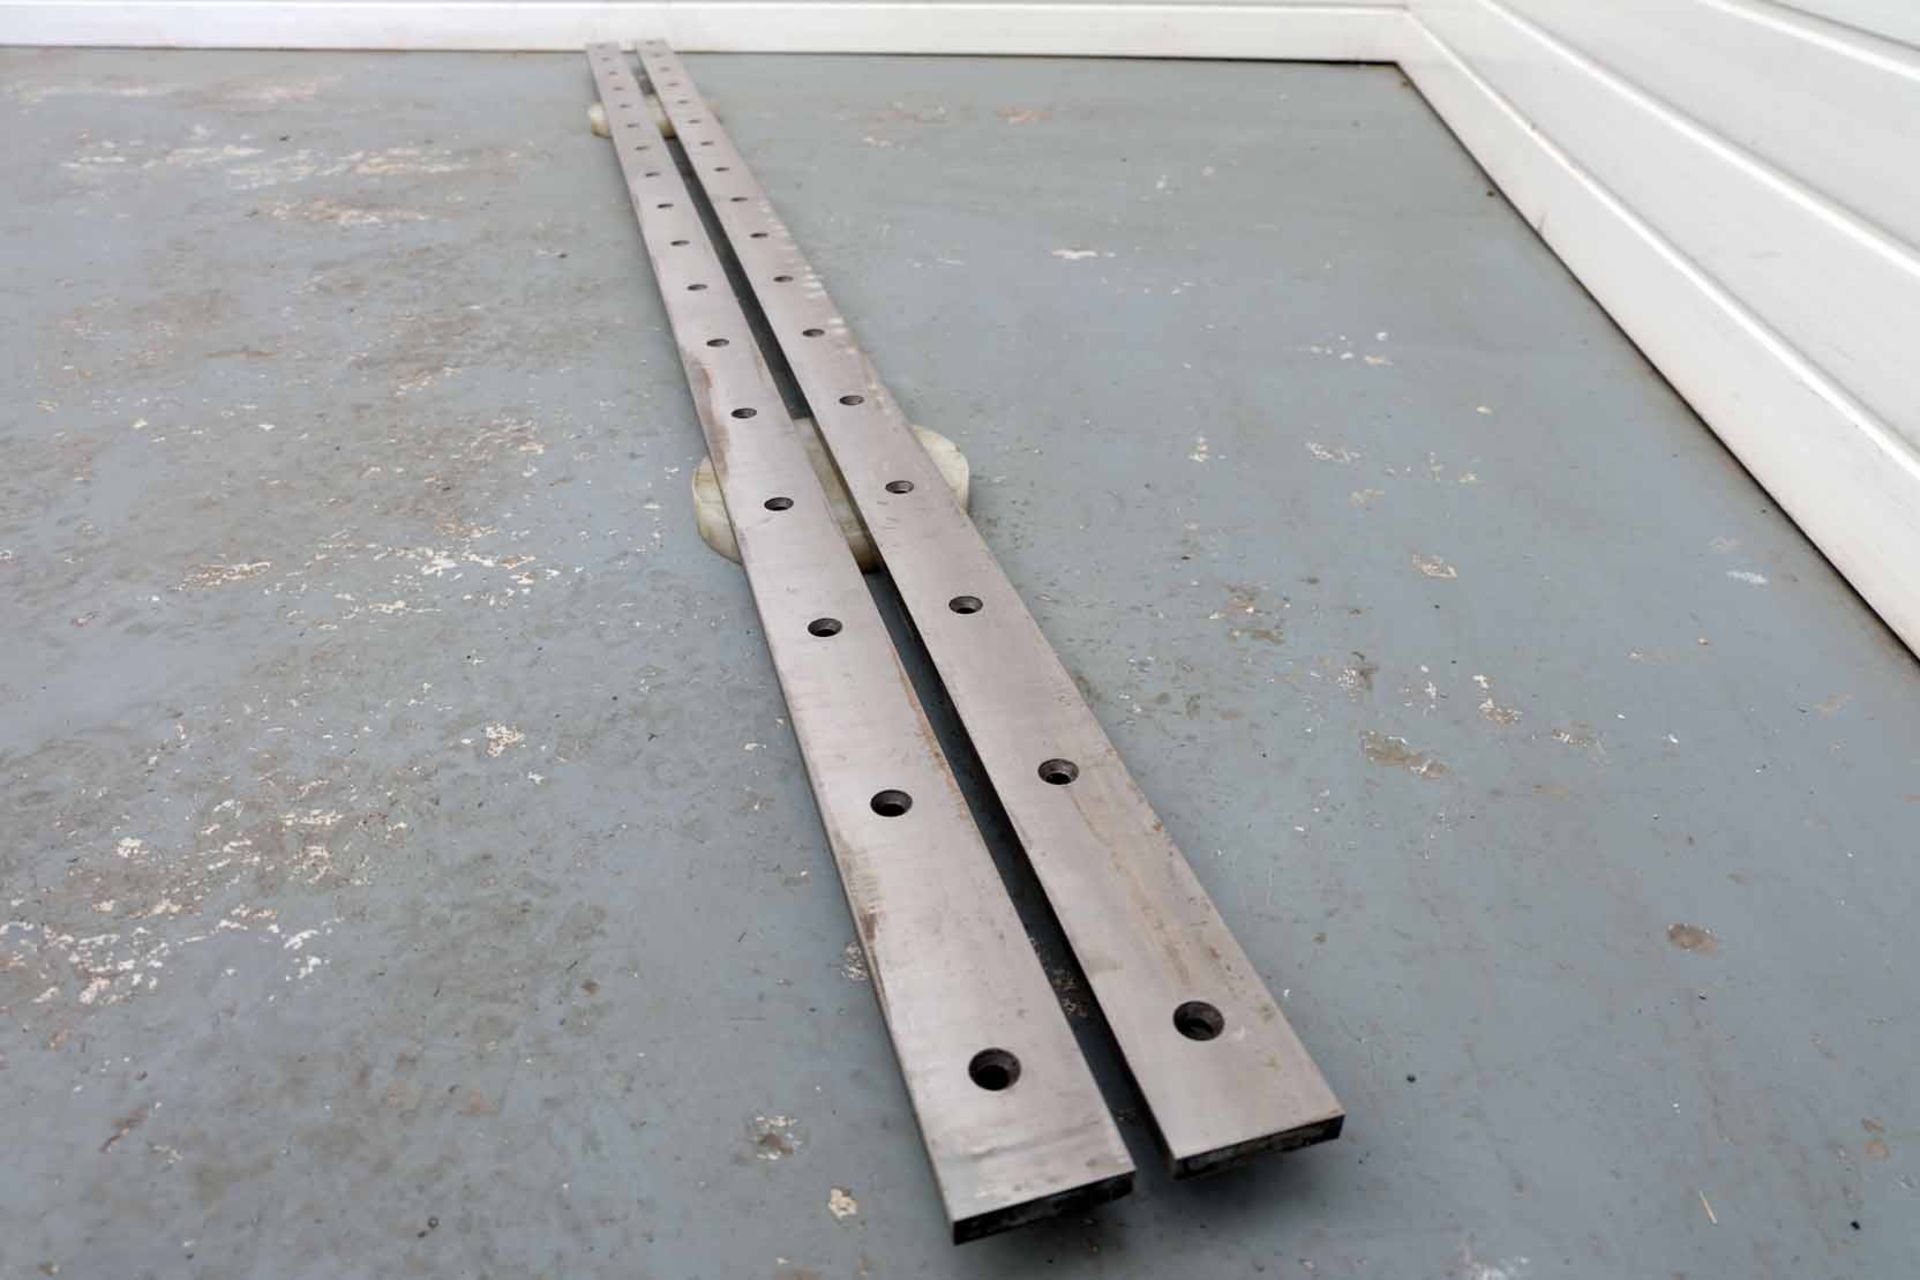 Pair of Guillotine Blades. Length 2542mm. Dimensions 62mm x 14mm. 17 Holes Counter Sunk Both Sides. - Image 5 of 6